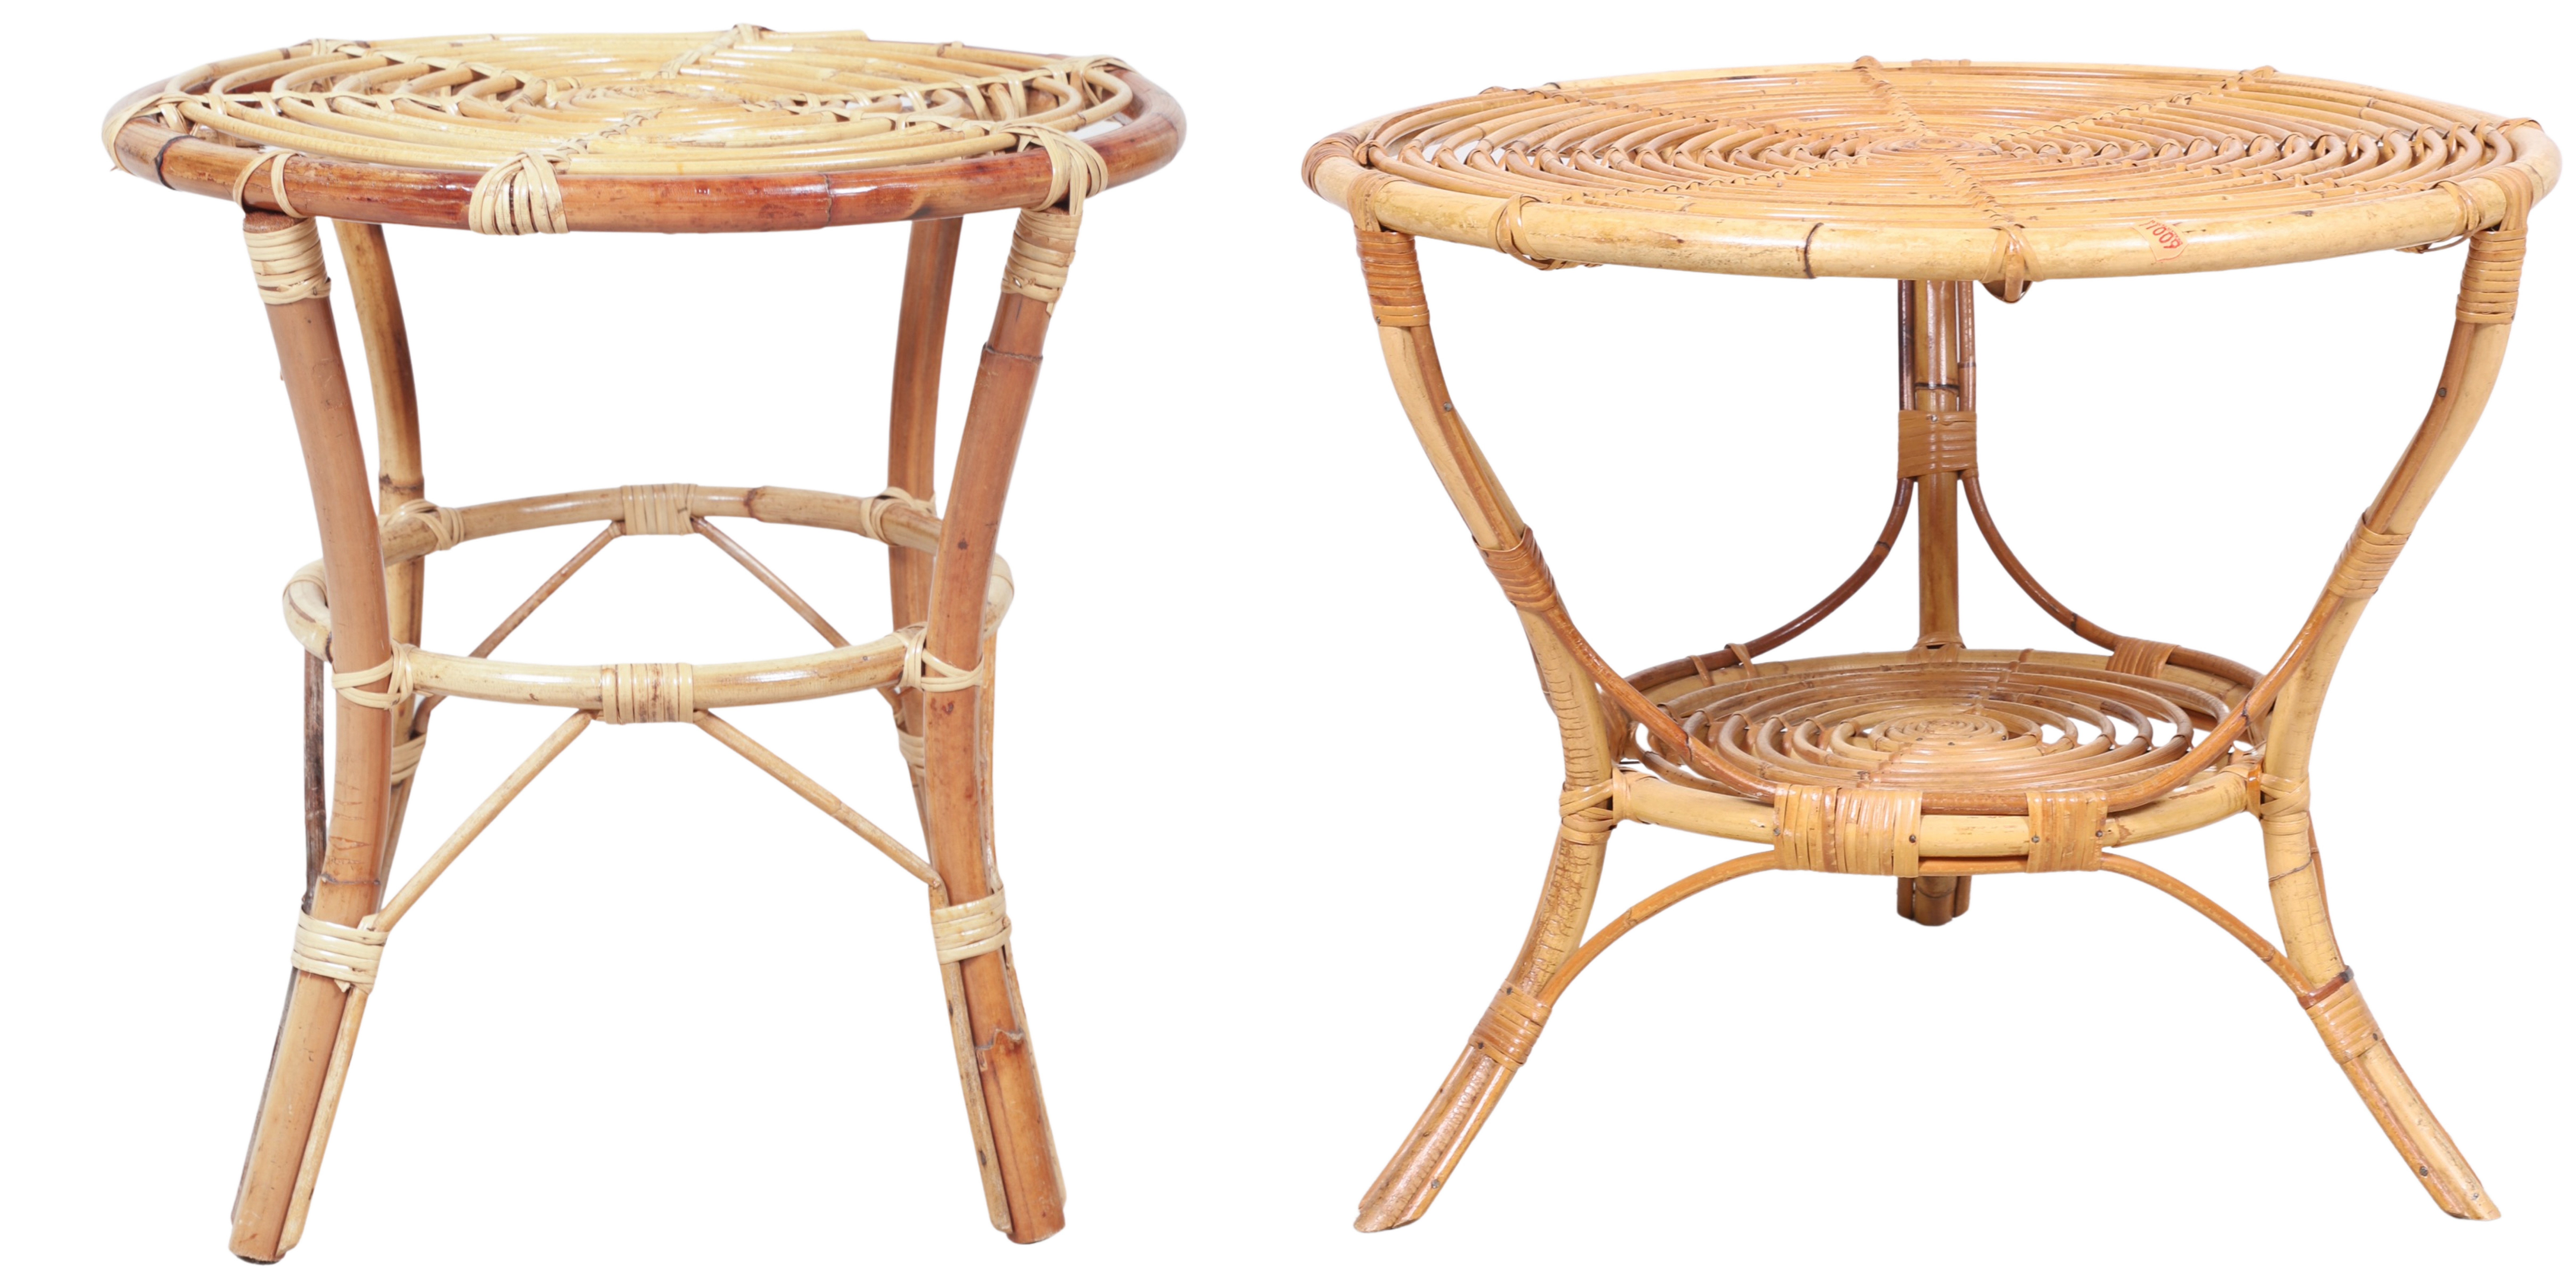 Bamboo and rattan side table, 18"h